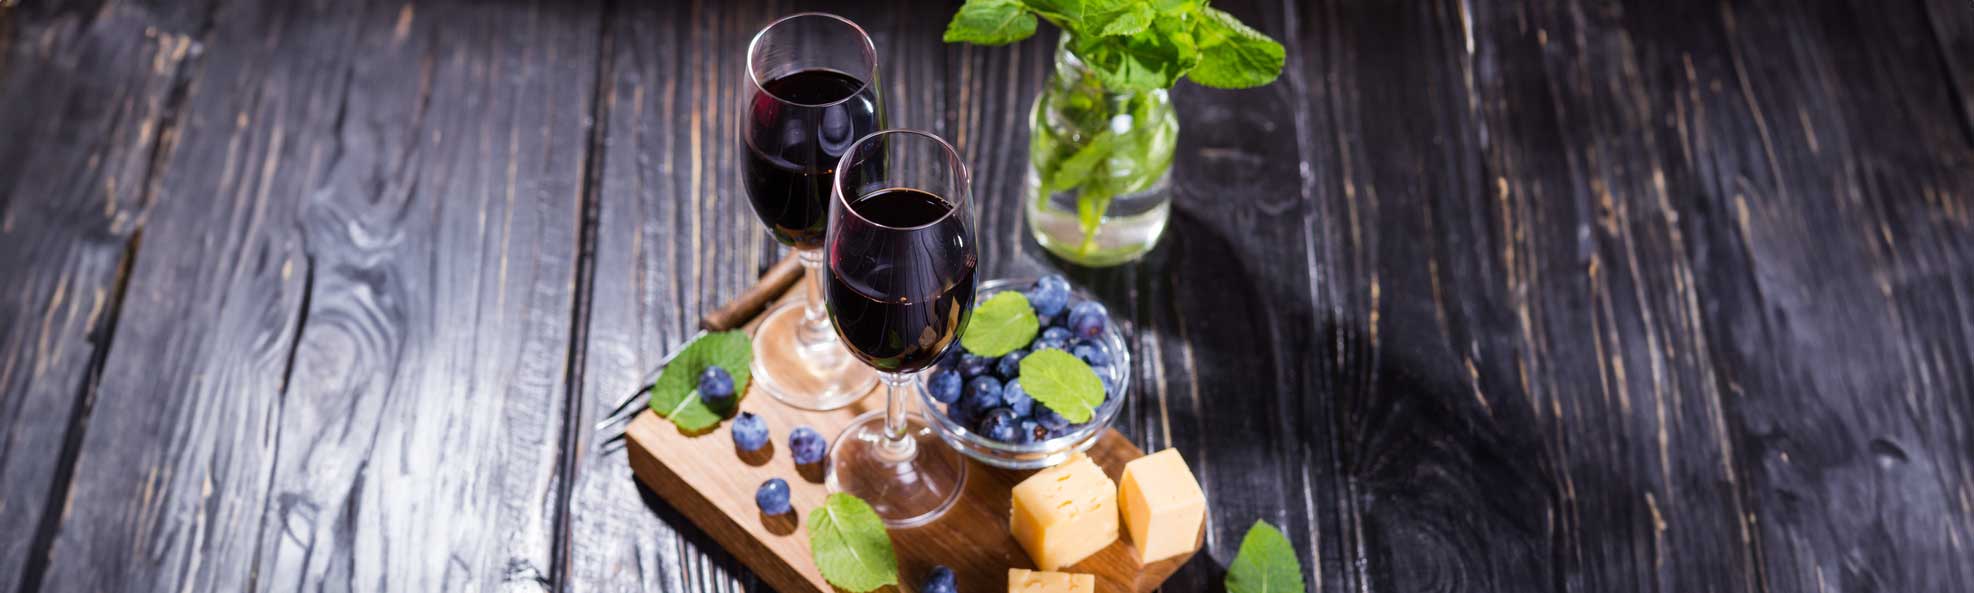 Glasses of blueberry wine, fresh blueberries, and cheese.